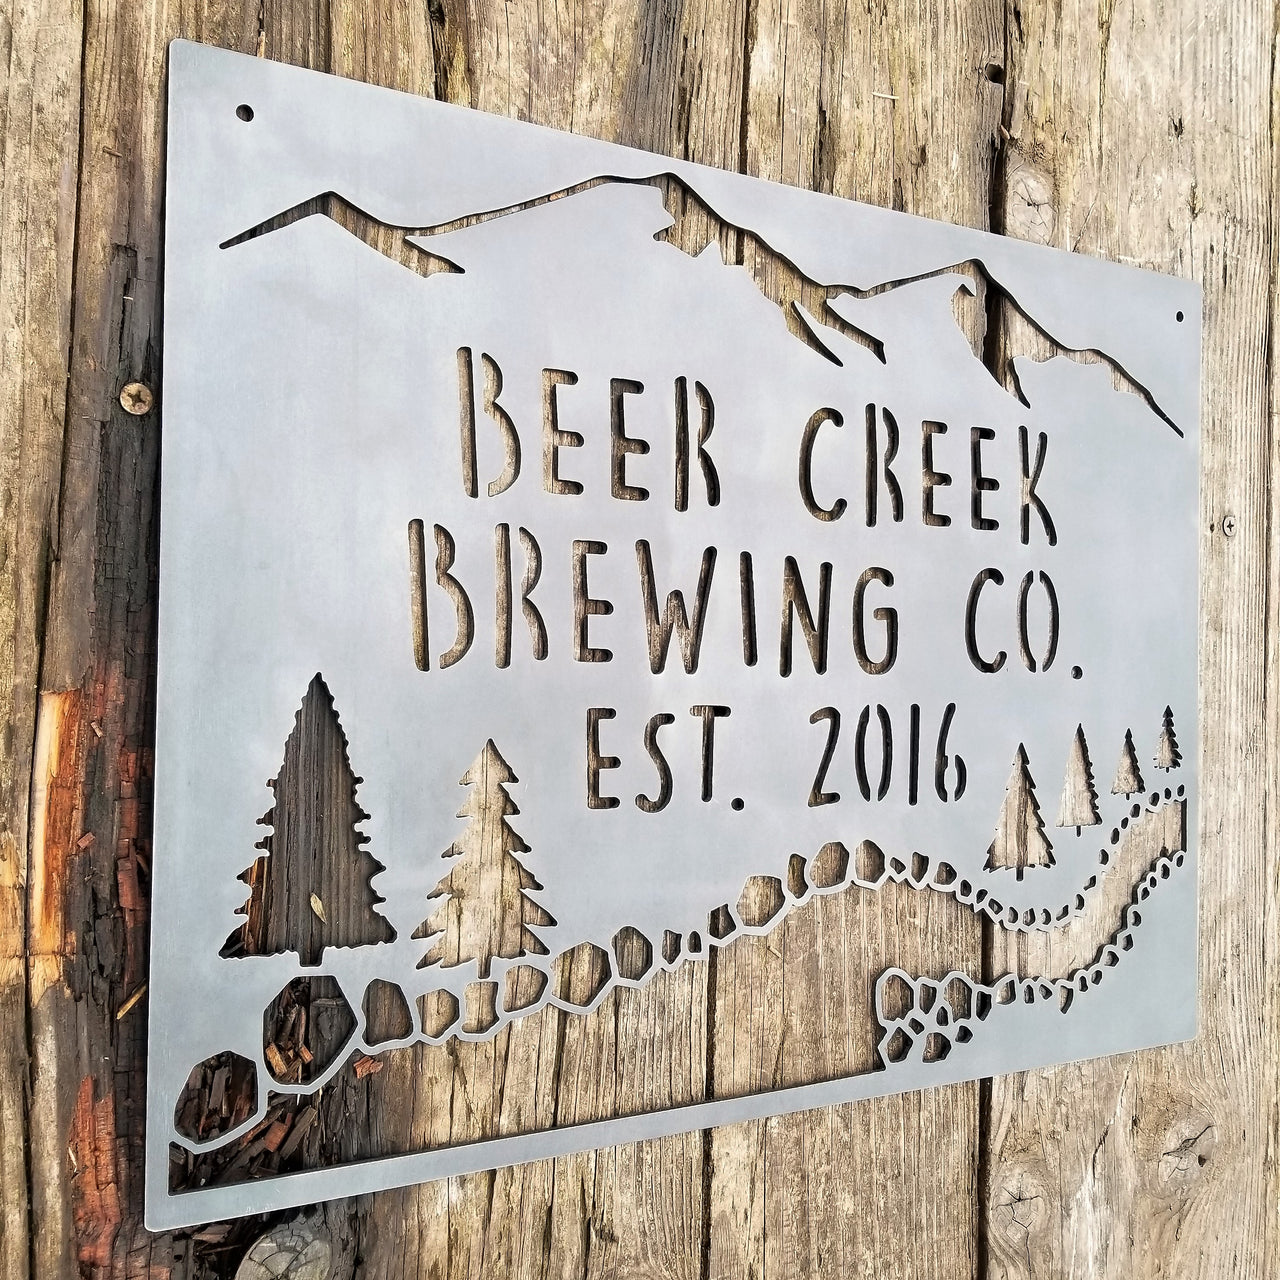 This sign showcases a mountain background with trees and a creek. The sign reads, " Beer Creek Brewing Co. Est. 2016".